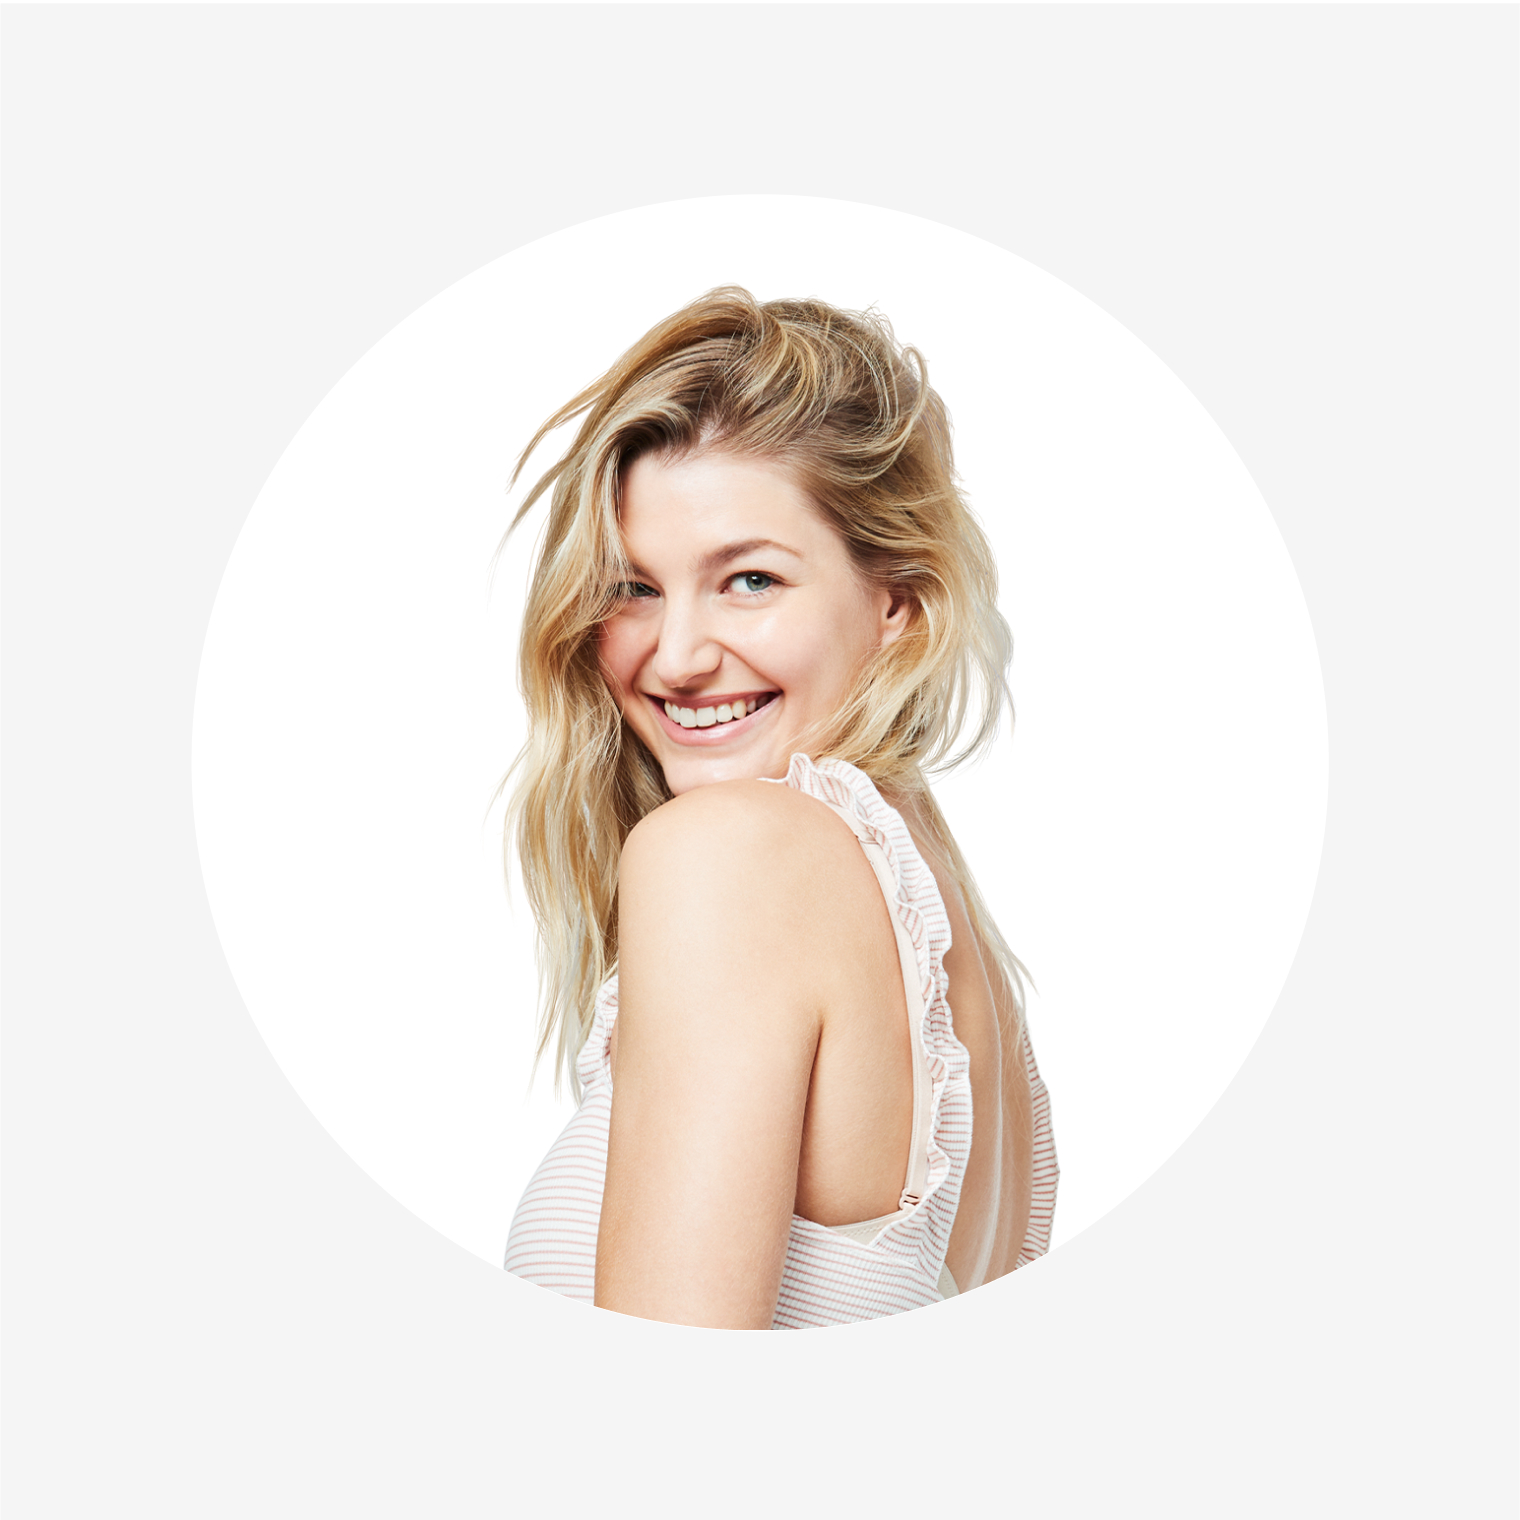 Blonde woman smiling in a white circle and grey background